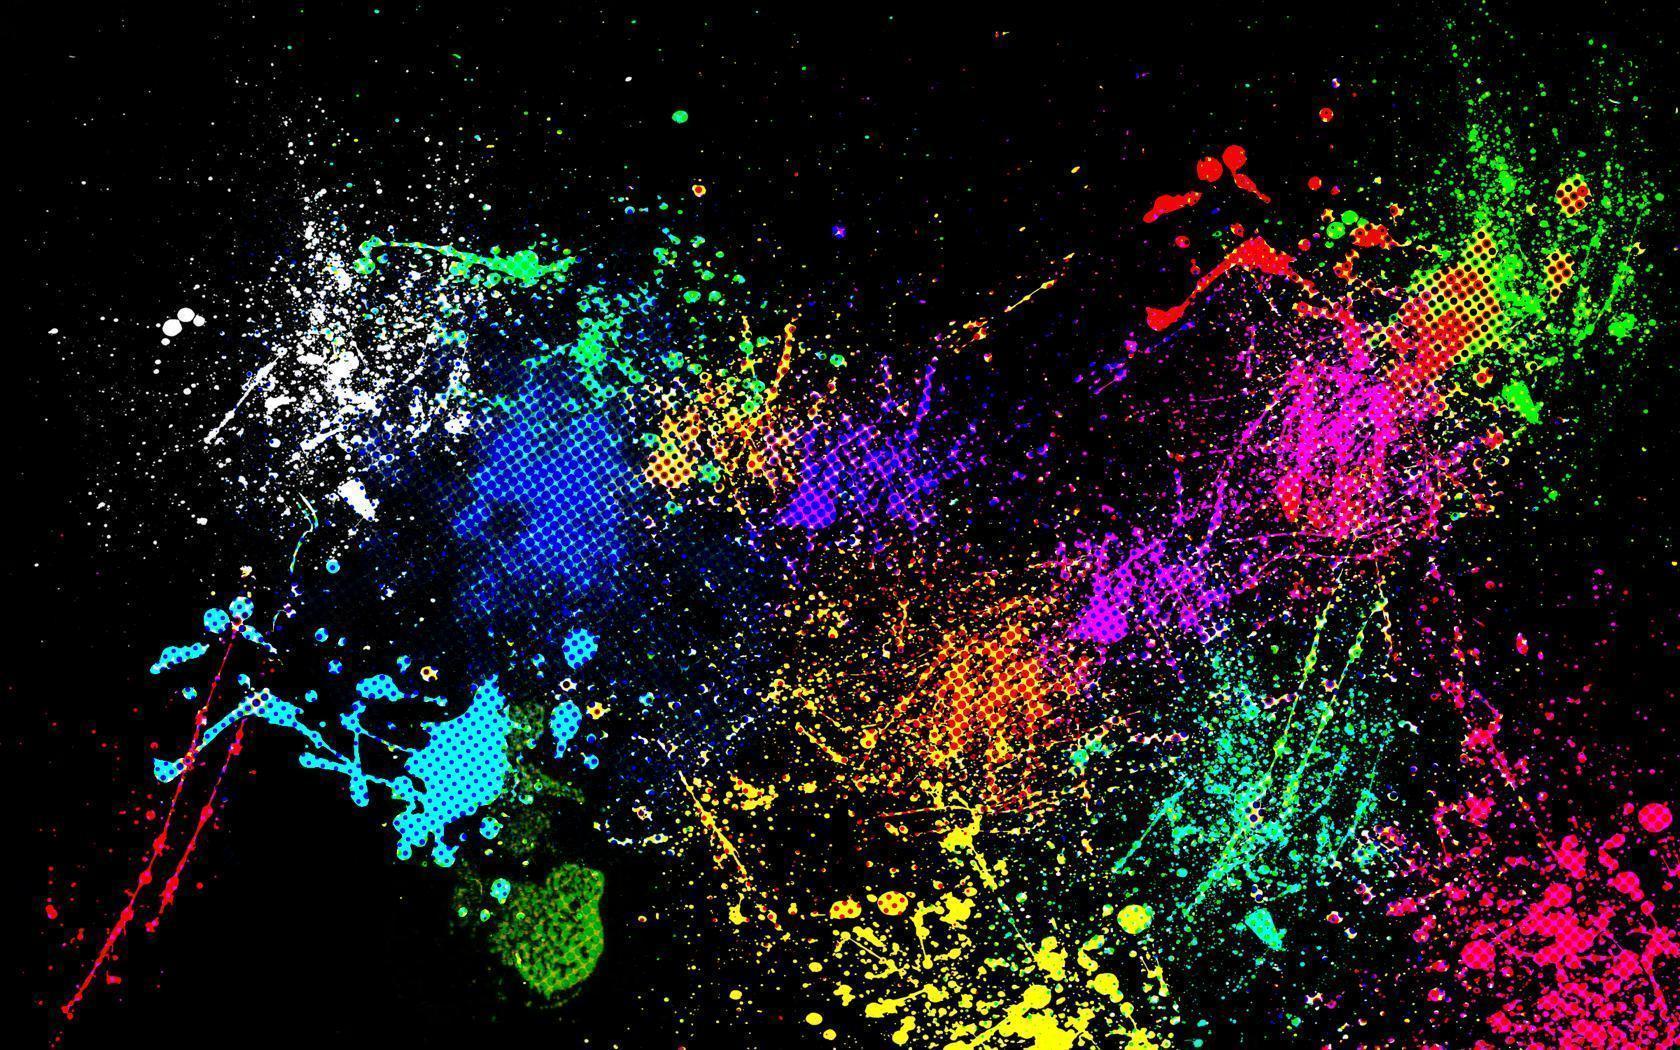 Wallpaper For > Awesome Paint Splatter Background